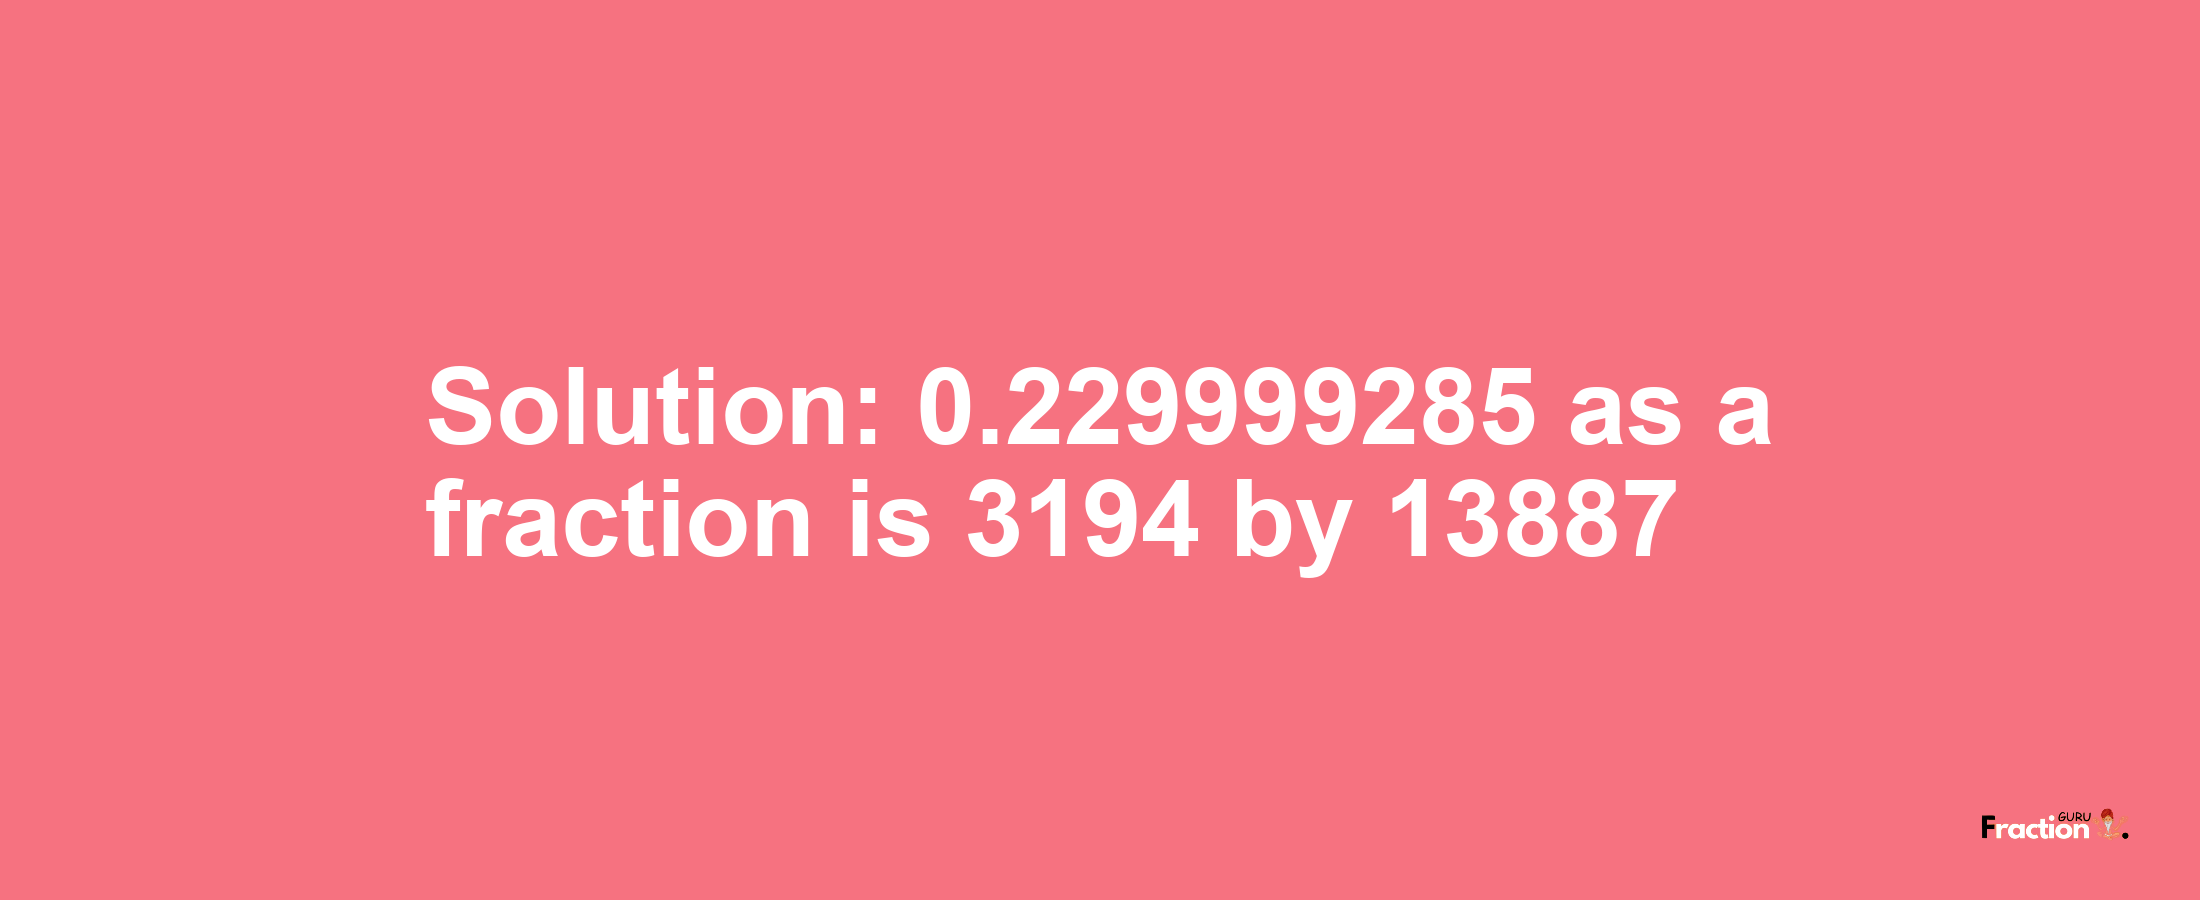 Solution:0.229999285 as a fraction is 3194/13887